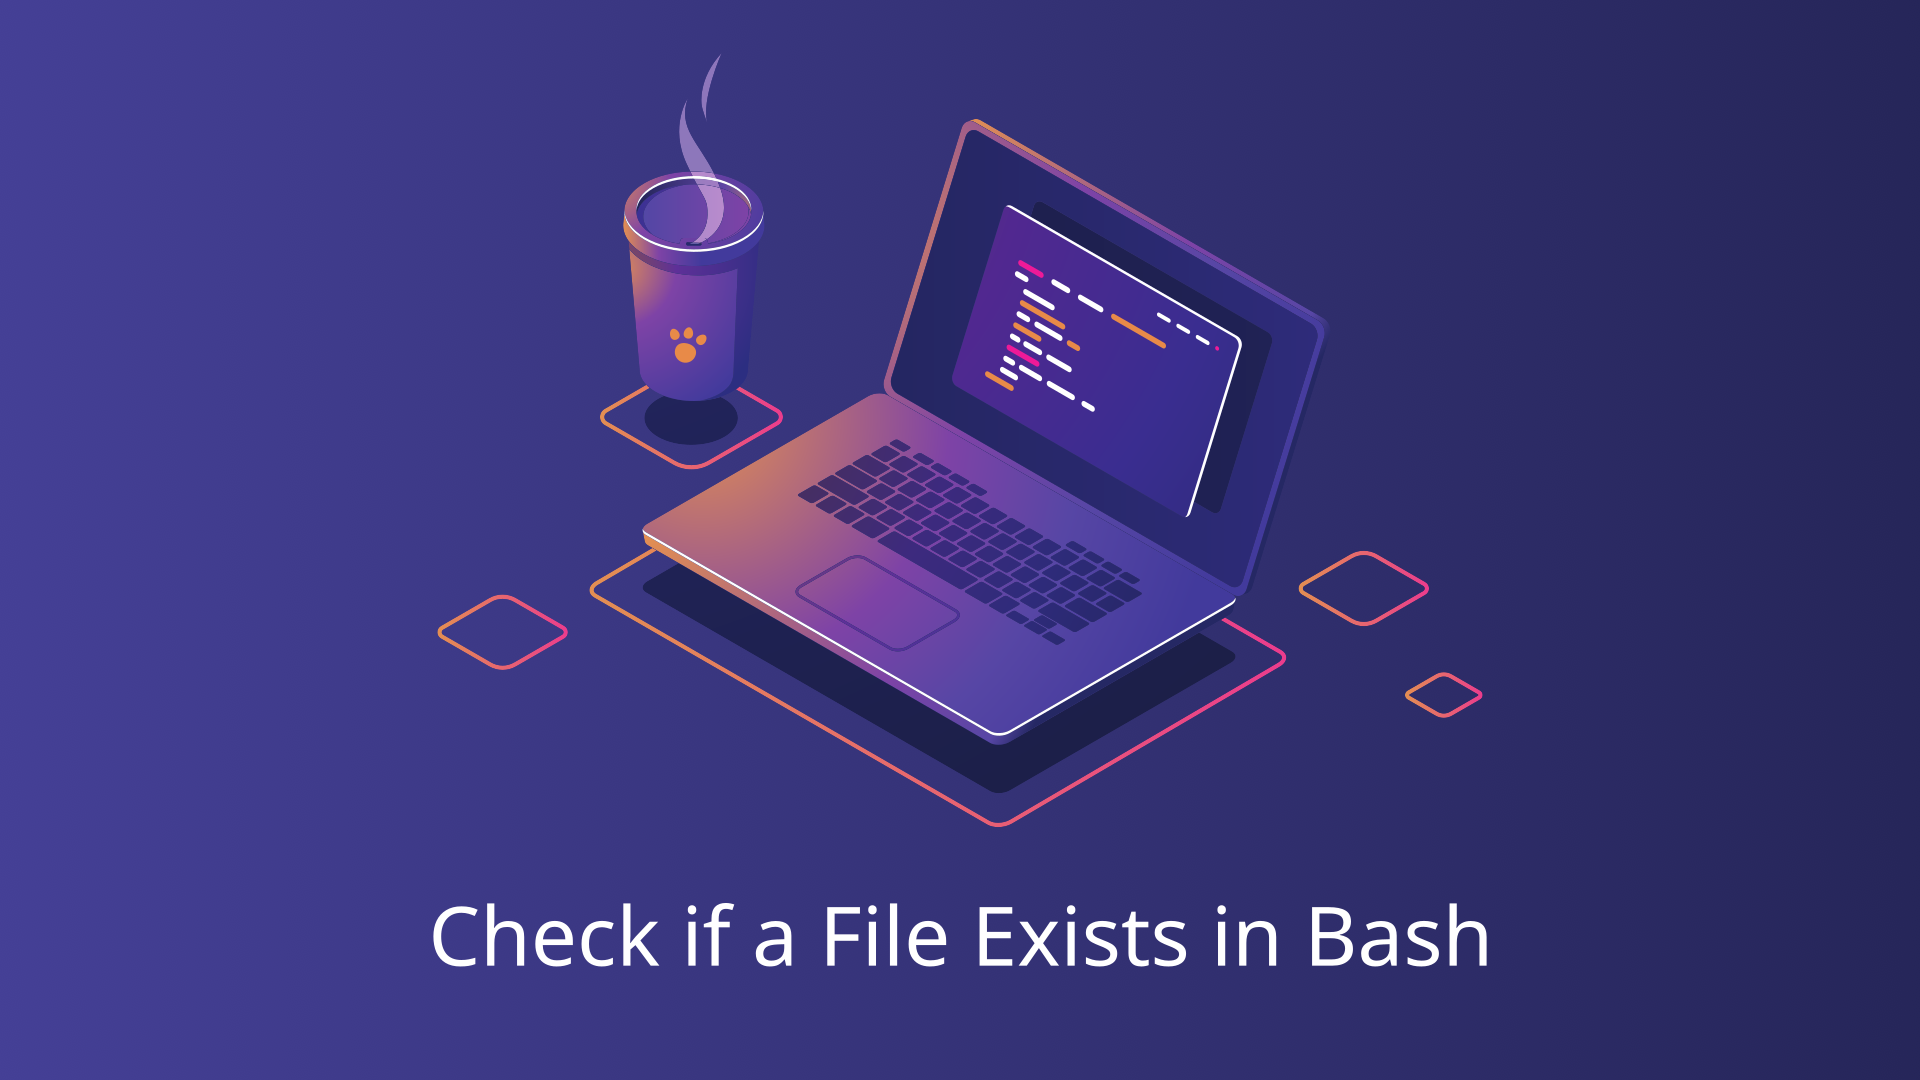 Check if a File Exists in Bash